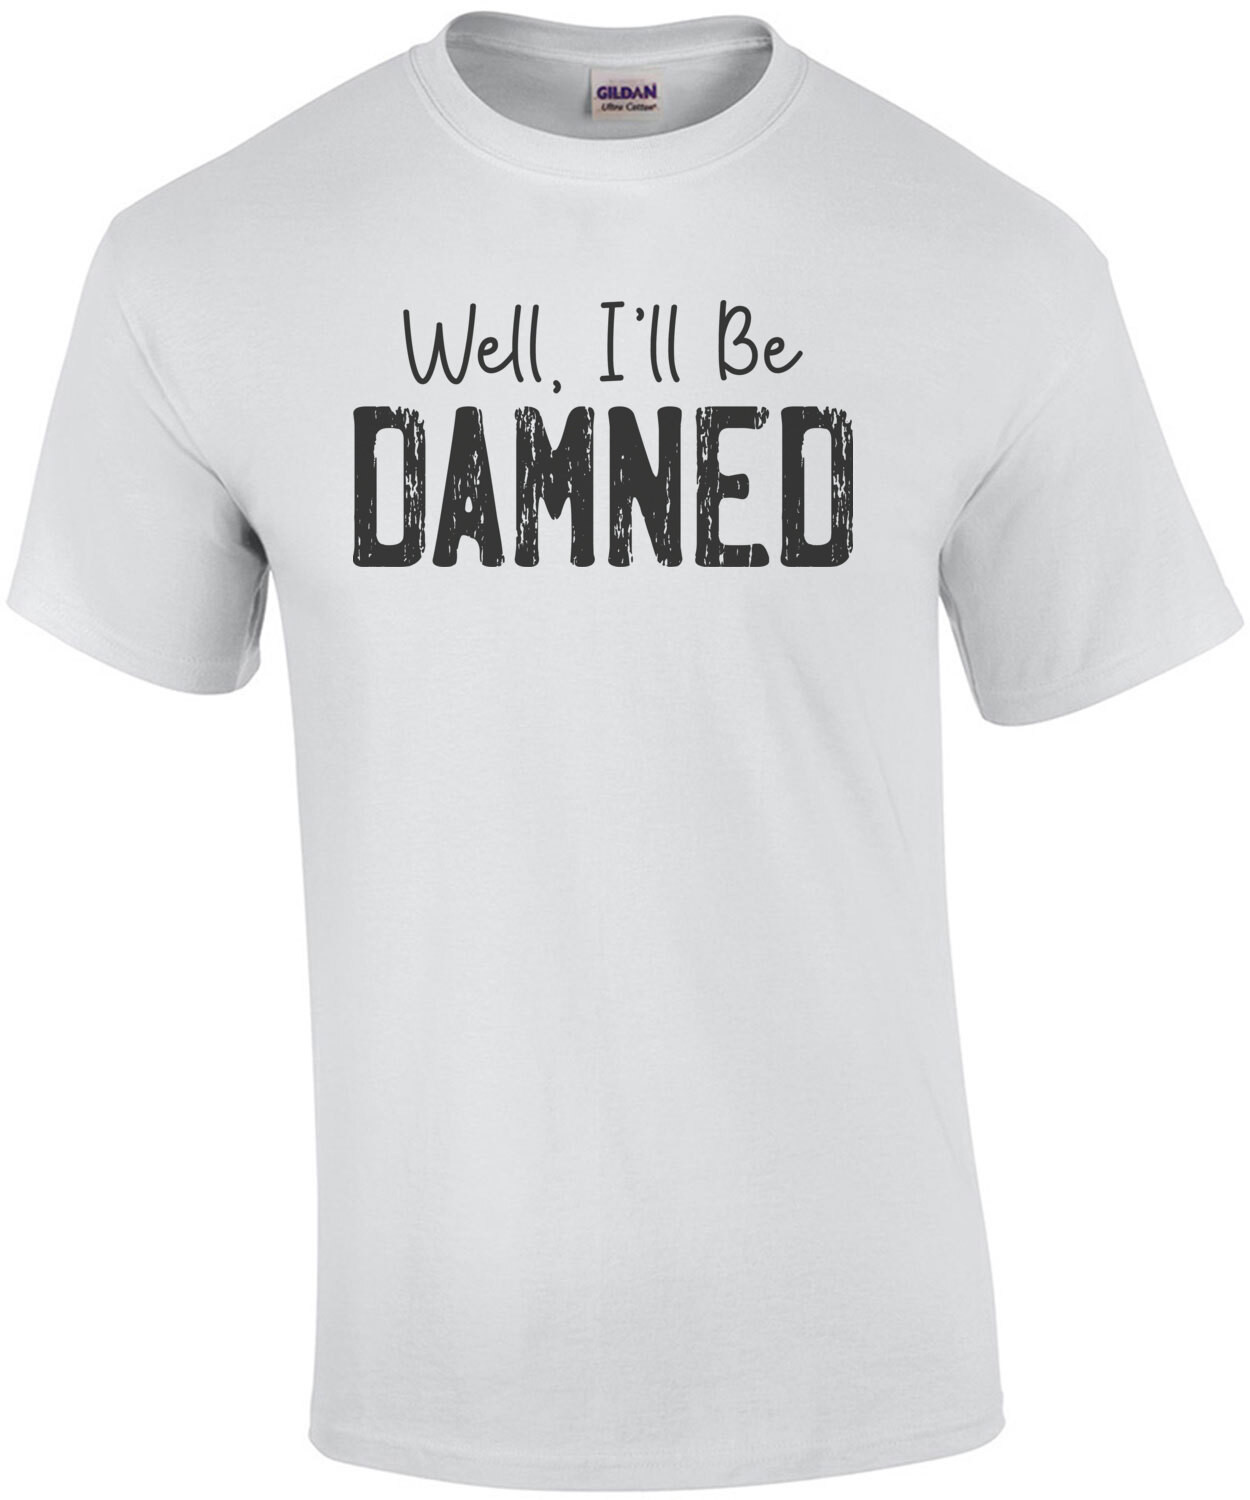 Well I'll be damned - funny t-shirt